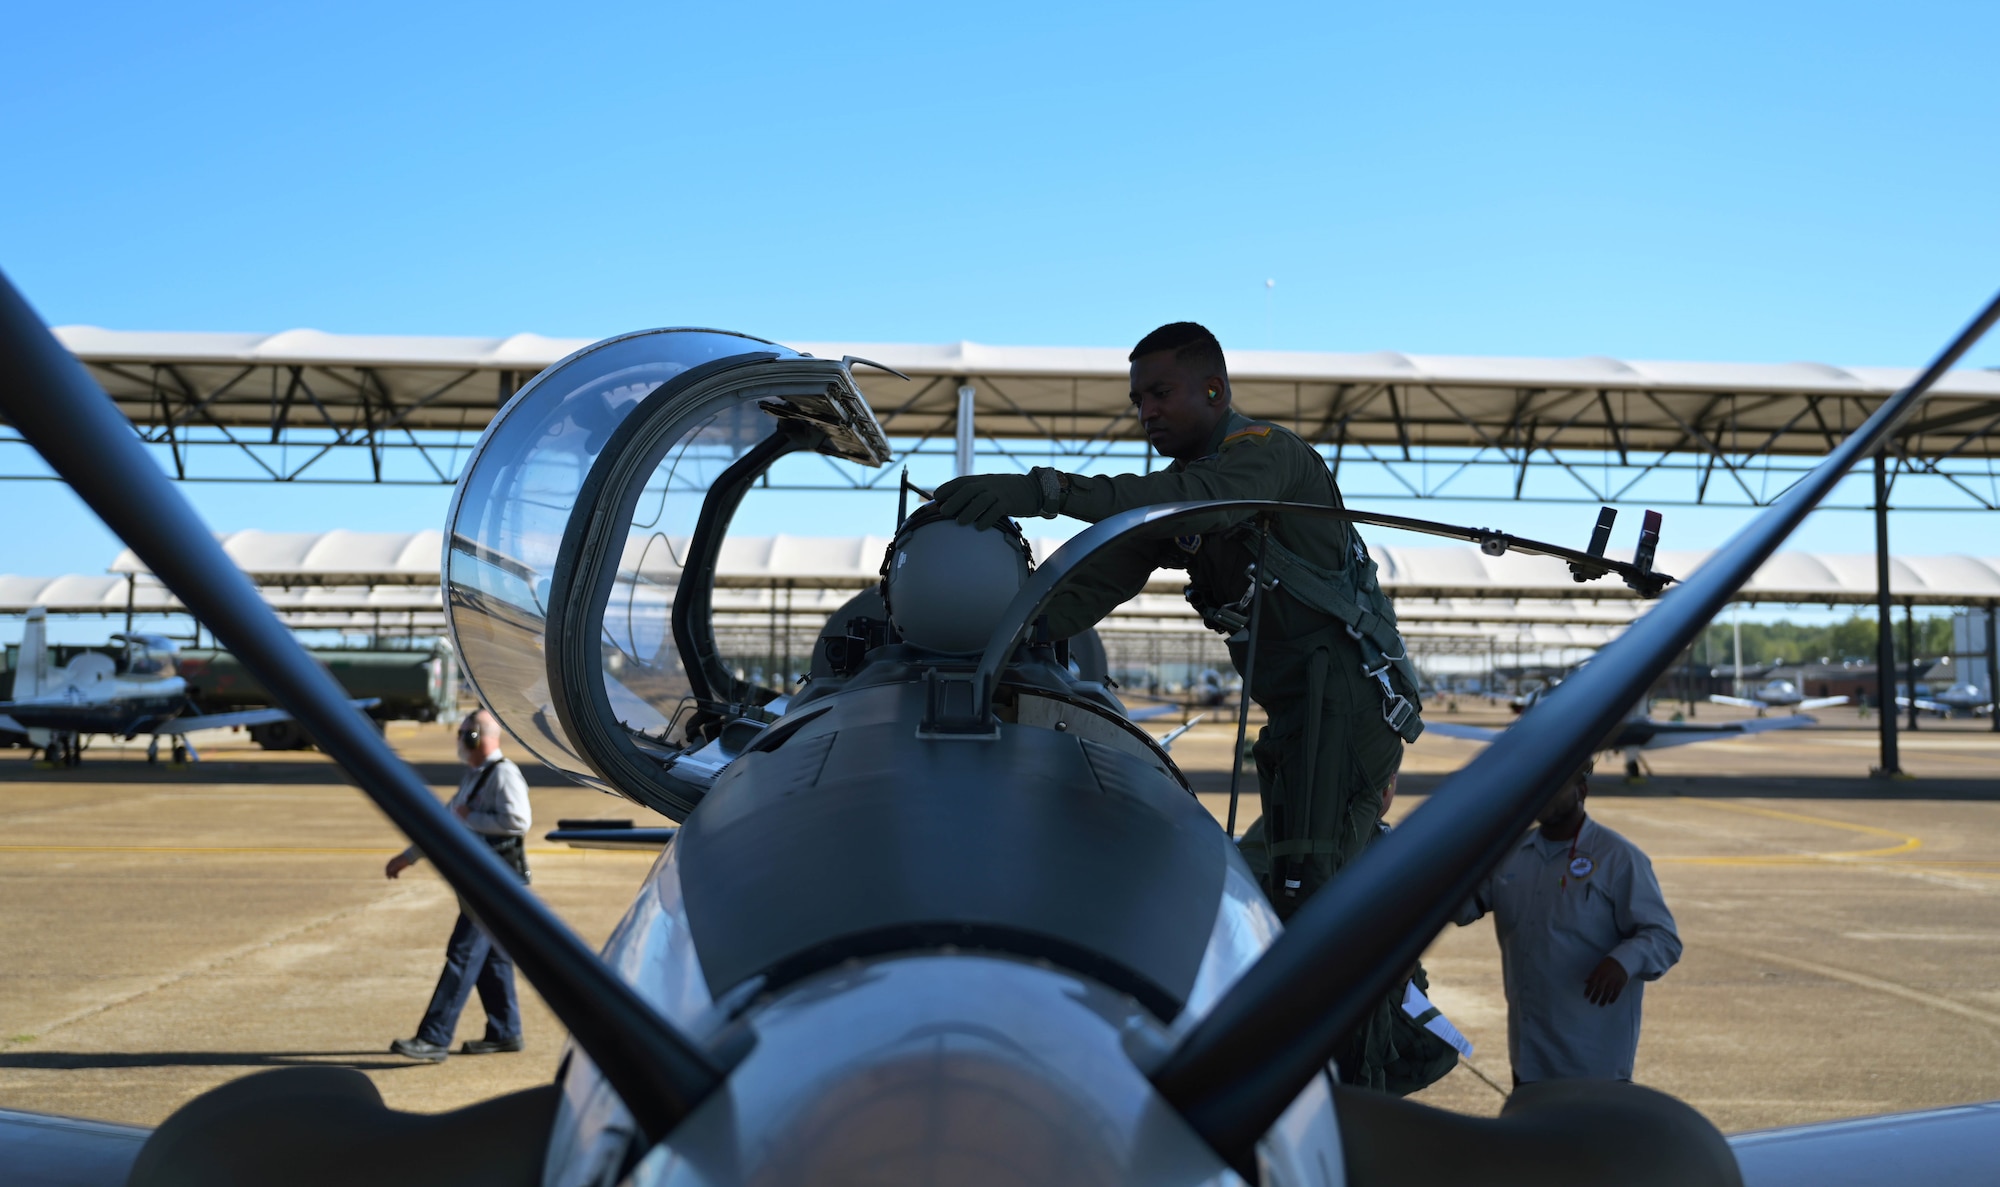 U.S. Air Force 2nd Lt. Clifford Mua, 41st Flying Training Squadron student pilot, places his helmet on the aircraft before stepping inside the cockpit of a T-6 Texan II Nov. 4, 2020, on Columbus Air Force Base Miss. Mua, originally from the Republic of Cameroon, came to the U.S., by winning a diversity visa lottery allowing him to immigrate here on a green card visa before eventually gaining his U.S. citizenship. (U.S. Air Force photo by Senior Airman Jake Jacobsen)